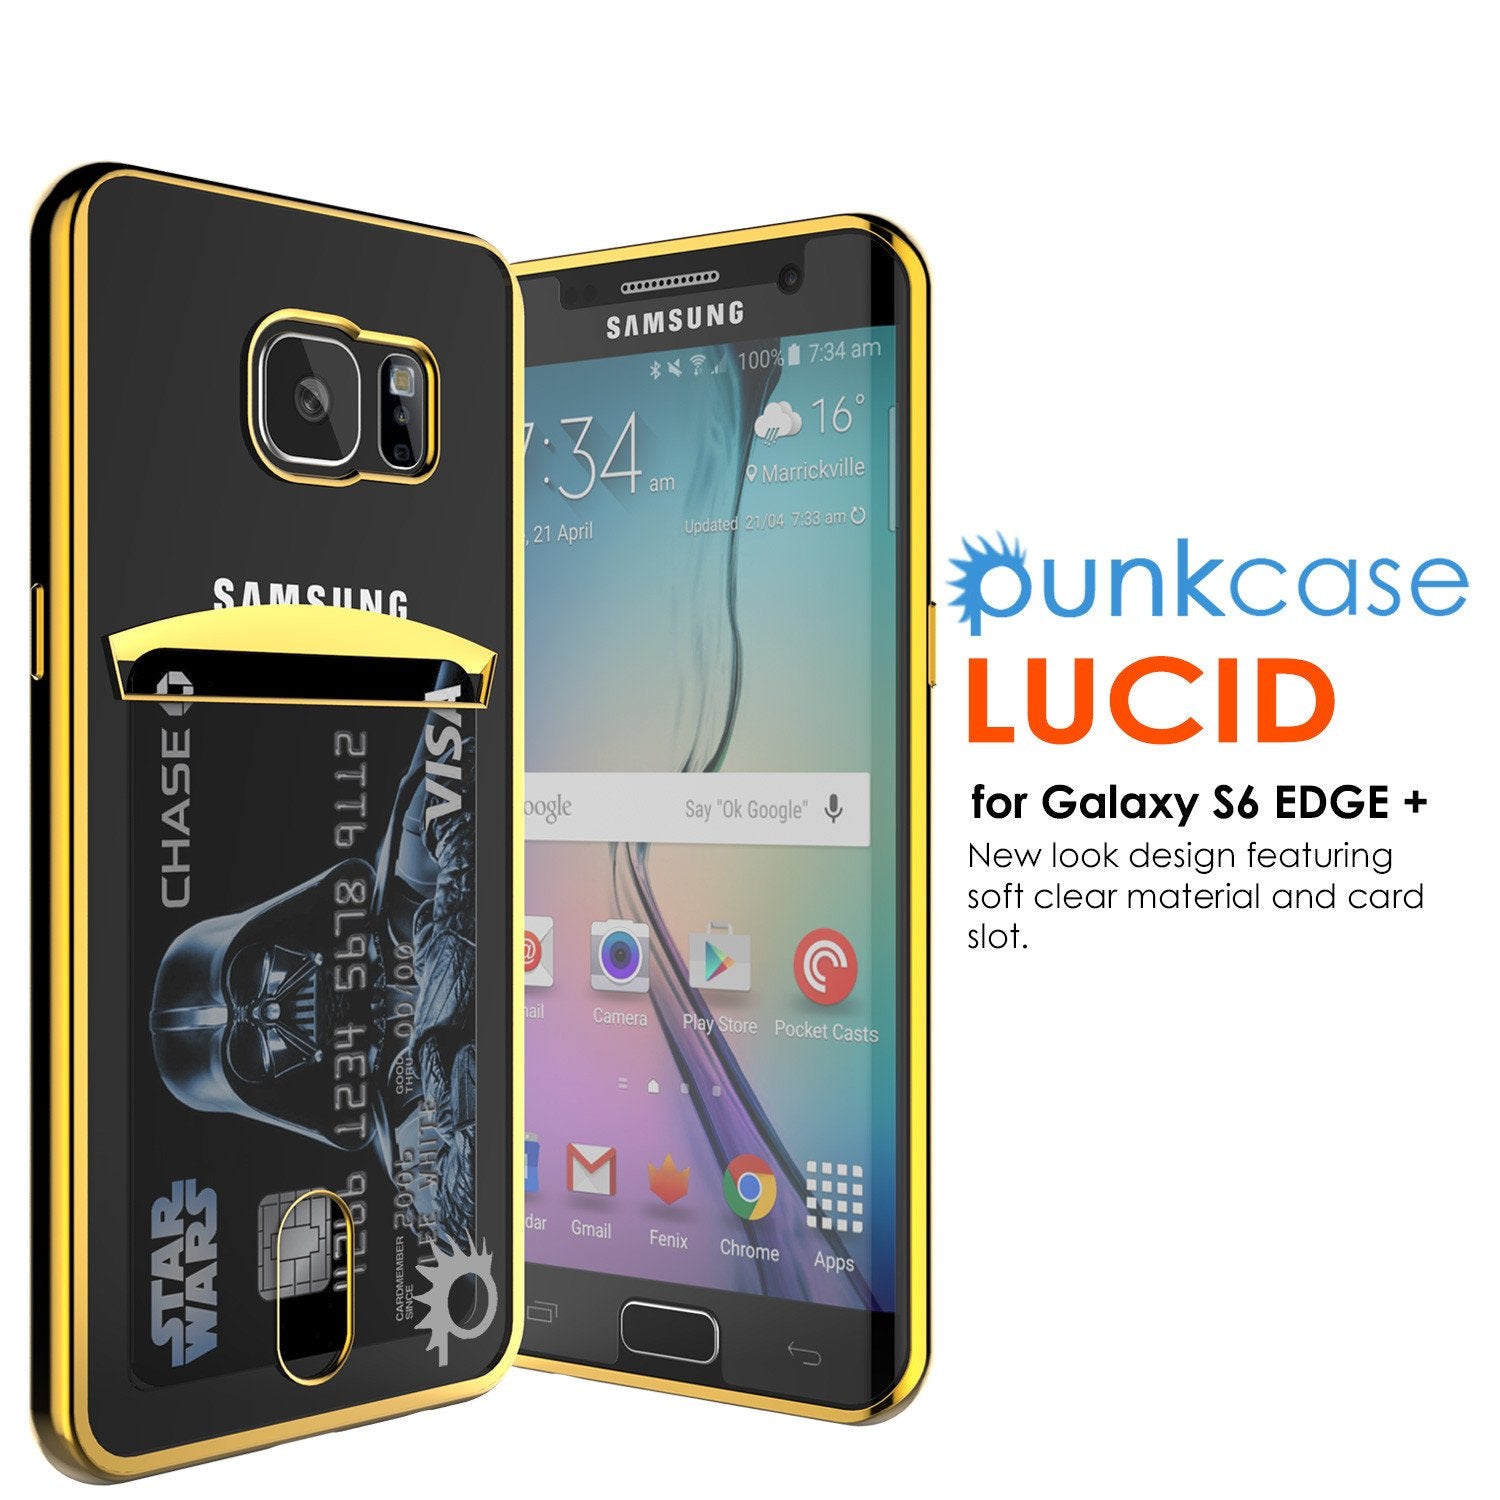 Galaxy S6 EDGE+ Plus Case, PUNKCASE® LUCID Gold Series | Card Slot | SHIELD Screen Protector - PunkCase NZ